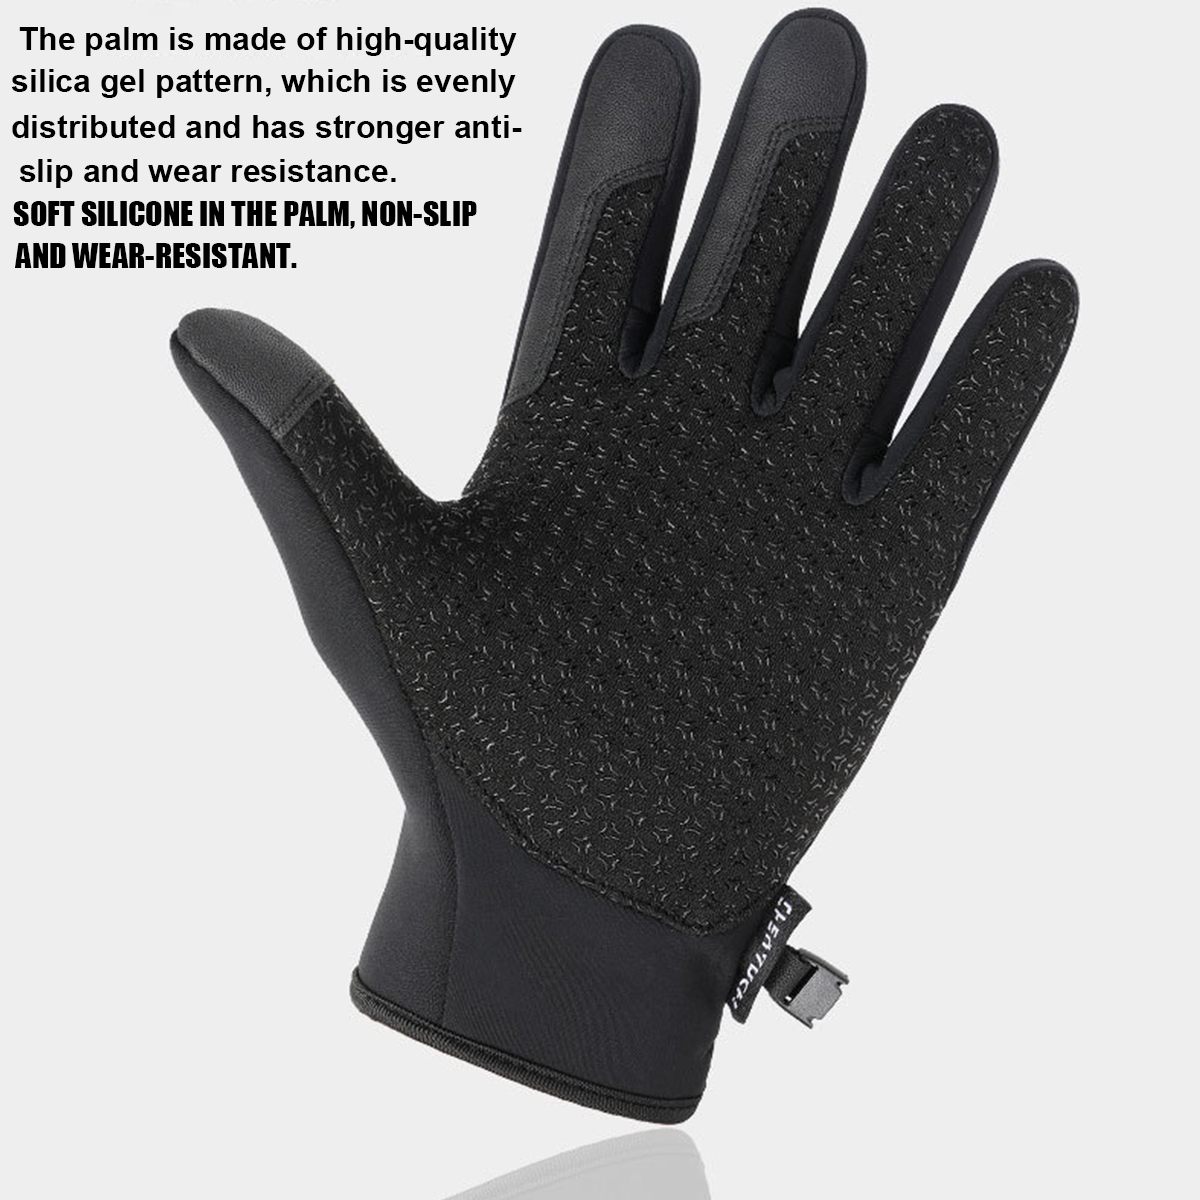 Winter-Warm-Touch-Screen-Thermal-Gloves-Ski-Snow-Snowboard-Cycling-Waterproof-Winter-Gloves-1921375-6